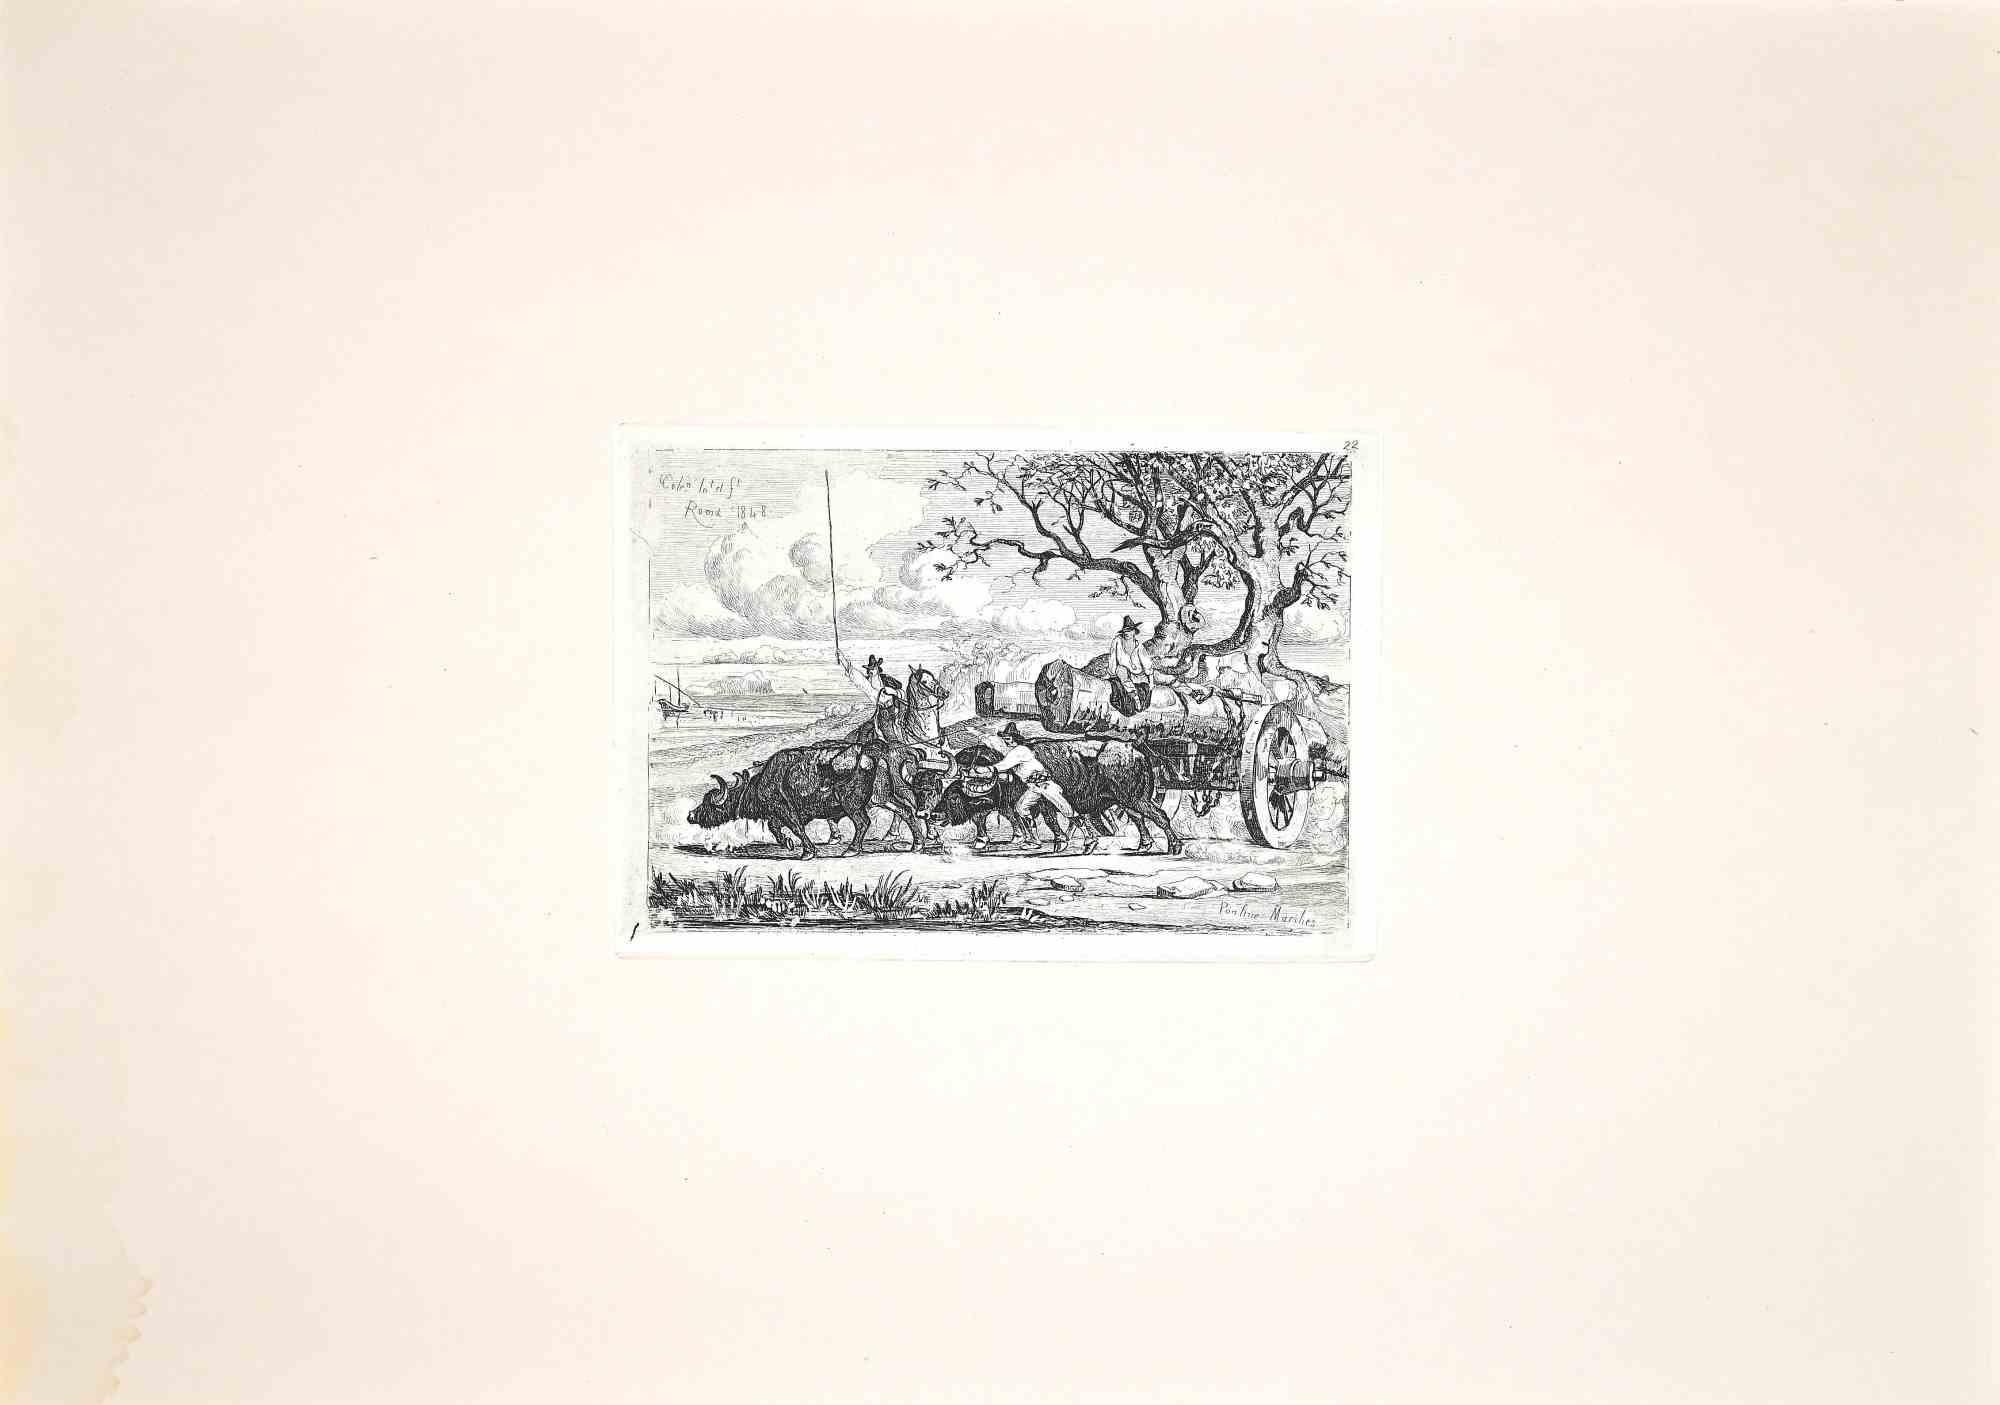 Buffalo in the Roman Countryside - Original Etching by Charles Coleman - 1992